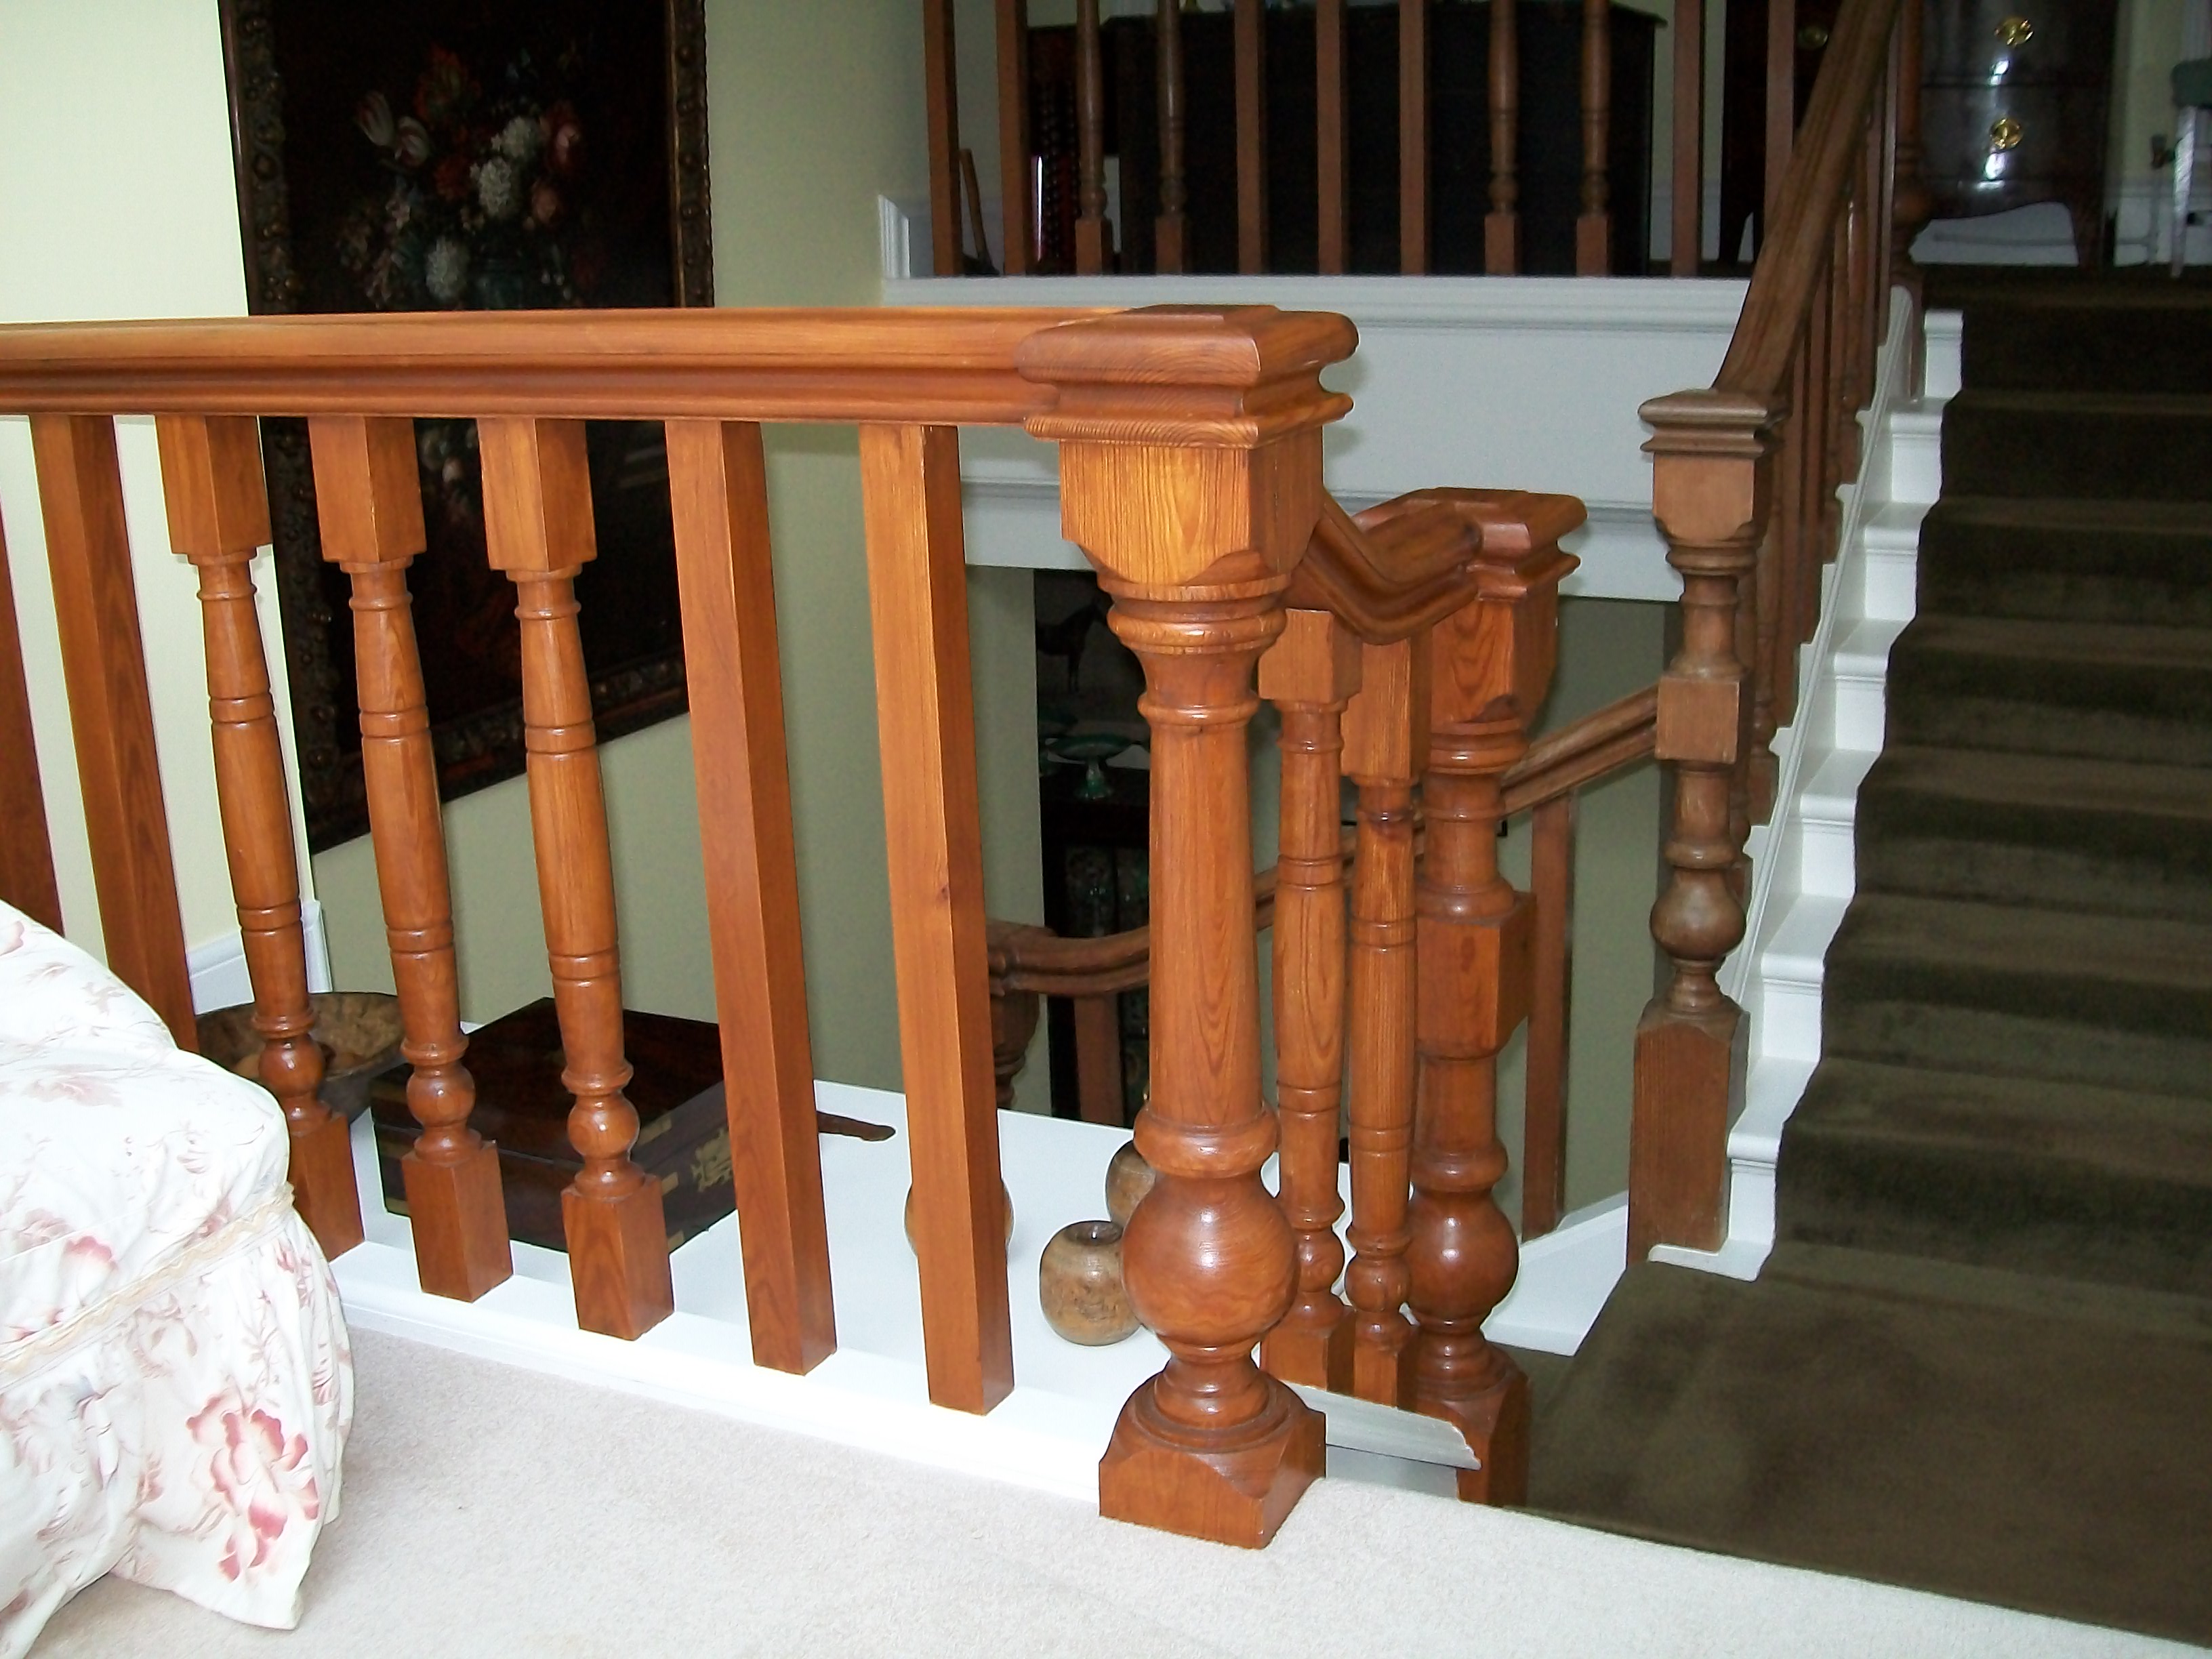 stairs, newel post, stair parts, spindles, restoration, woodturning, handrail, replica, bespoke, custom made, newel posts, reclaimed wood, conservation,